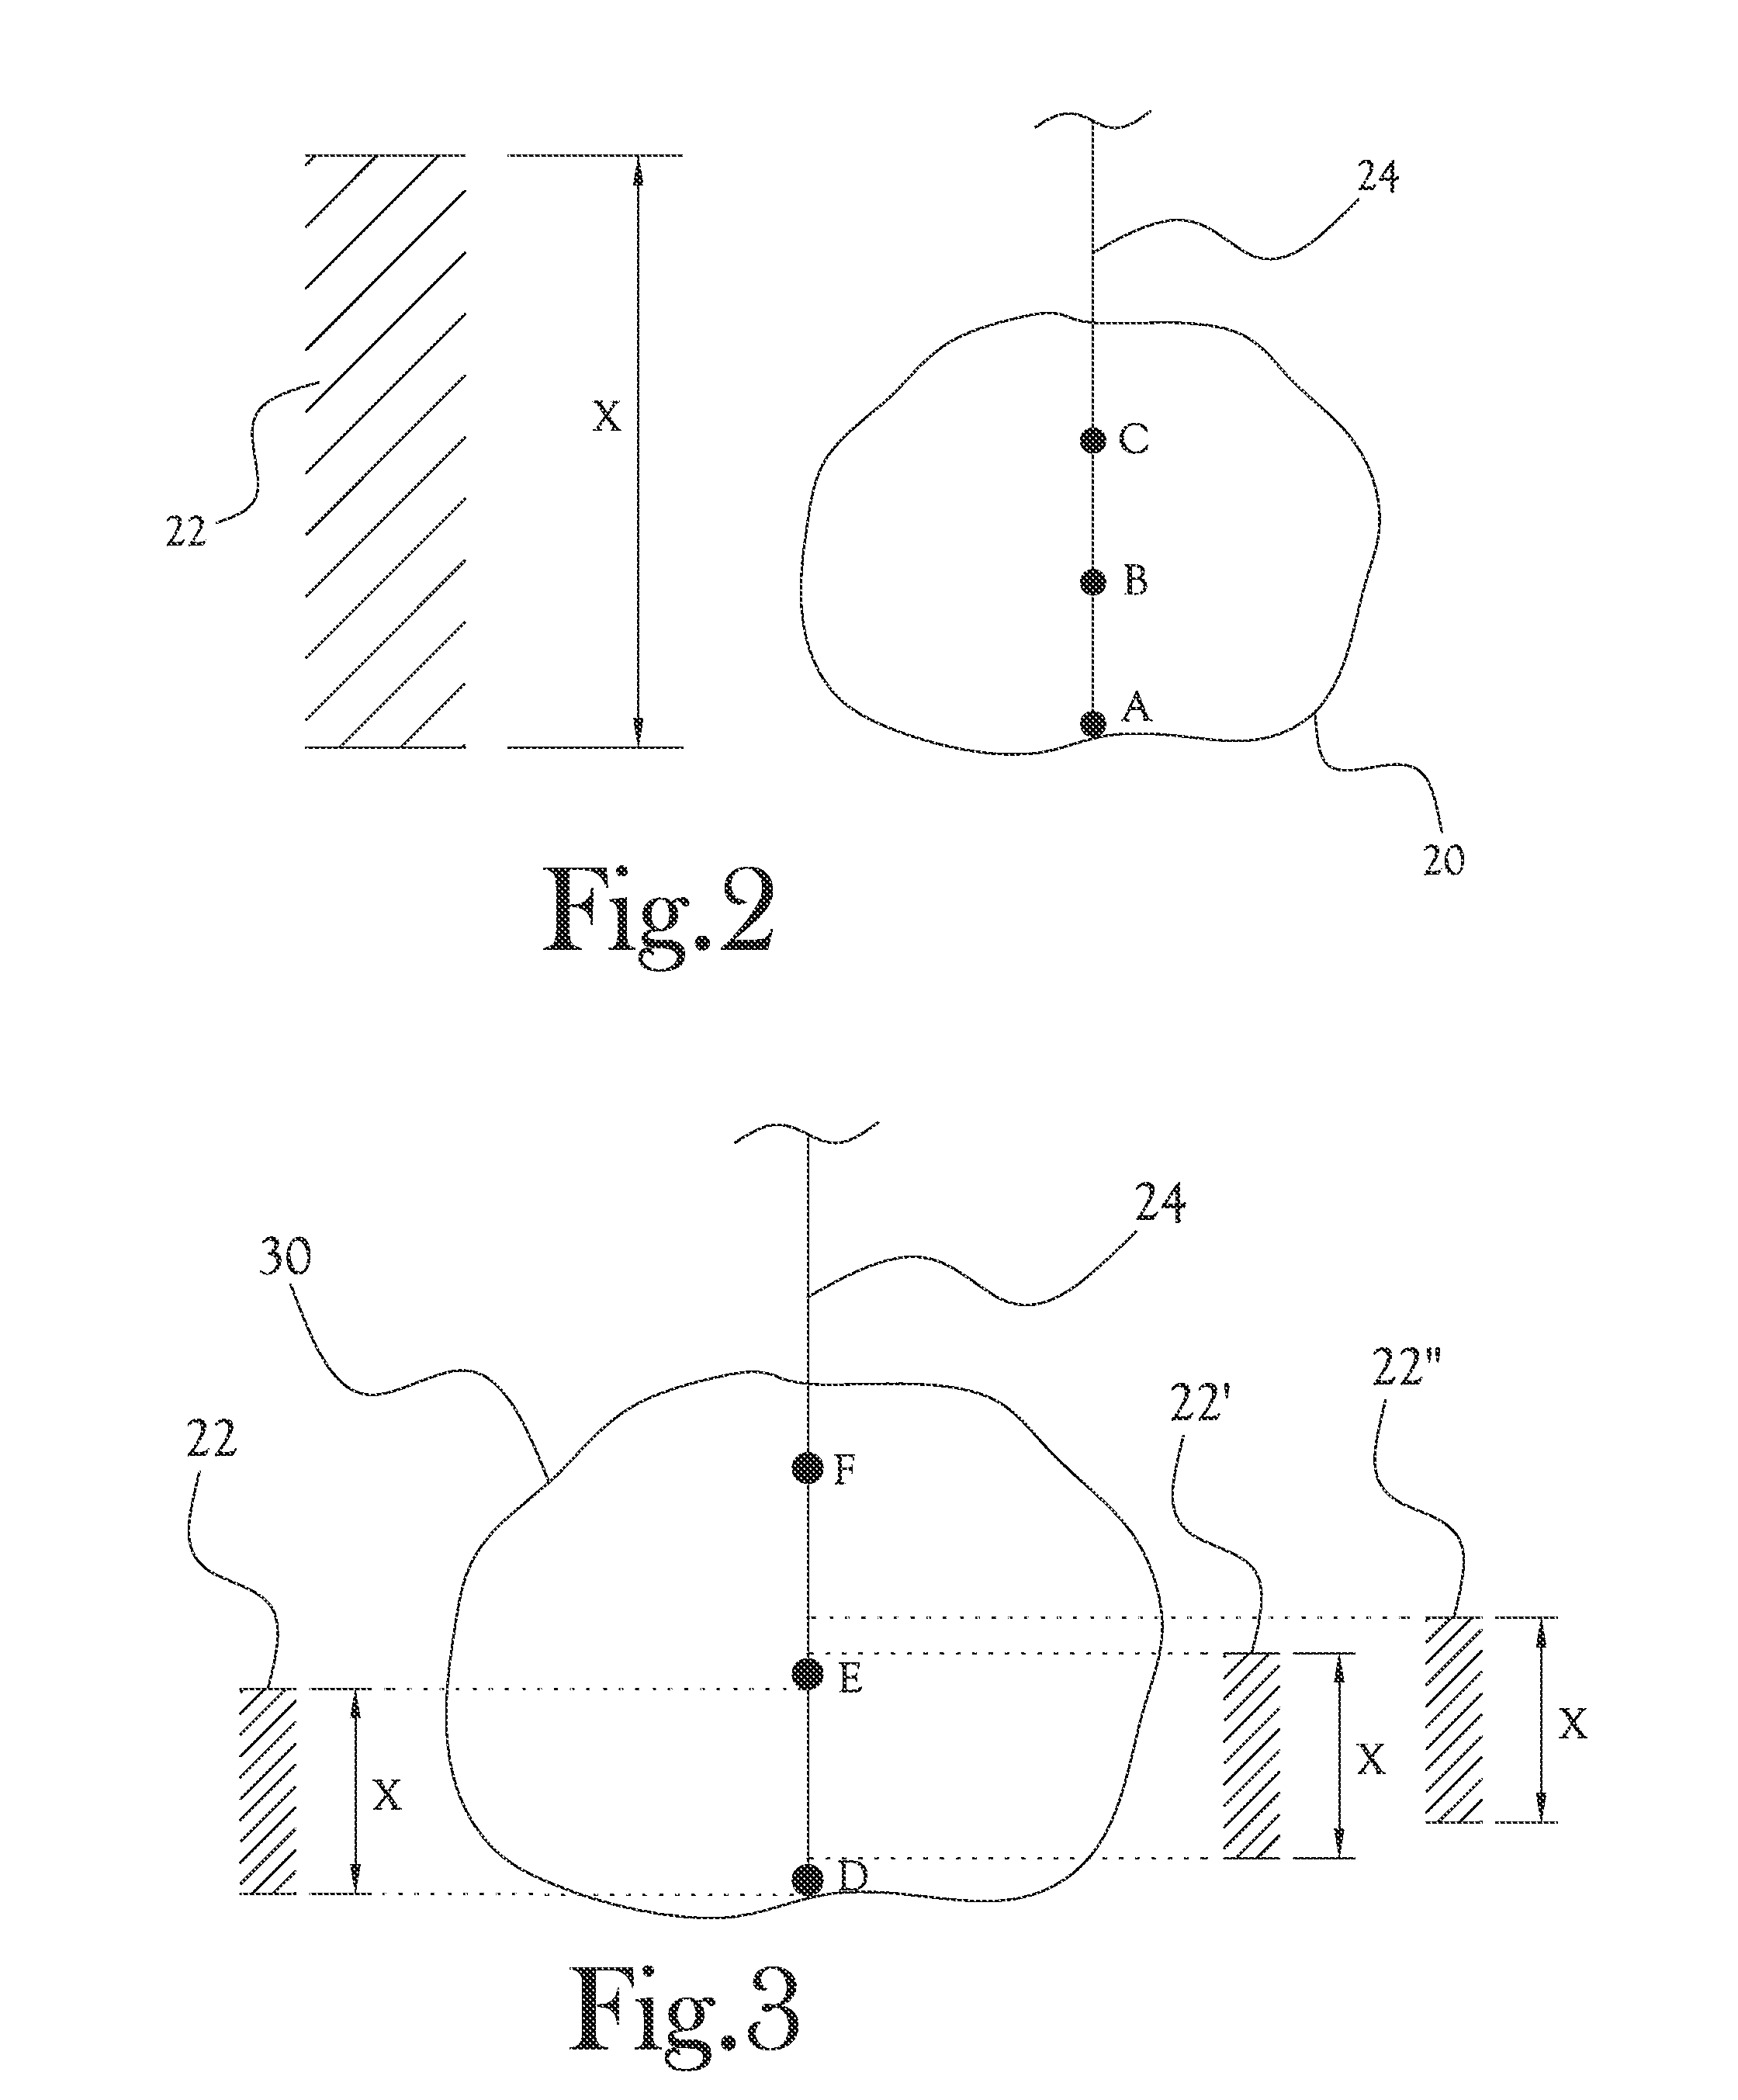 Systems and methods of controlling a proton beam of a proton treatment system